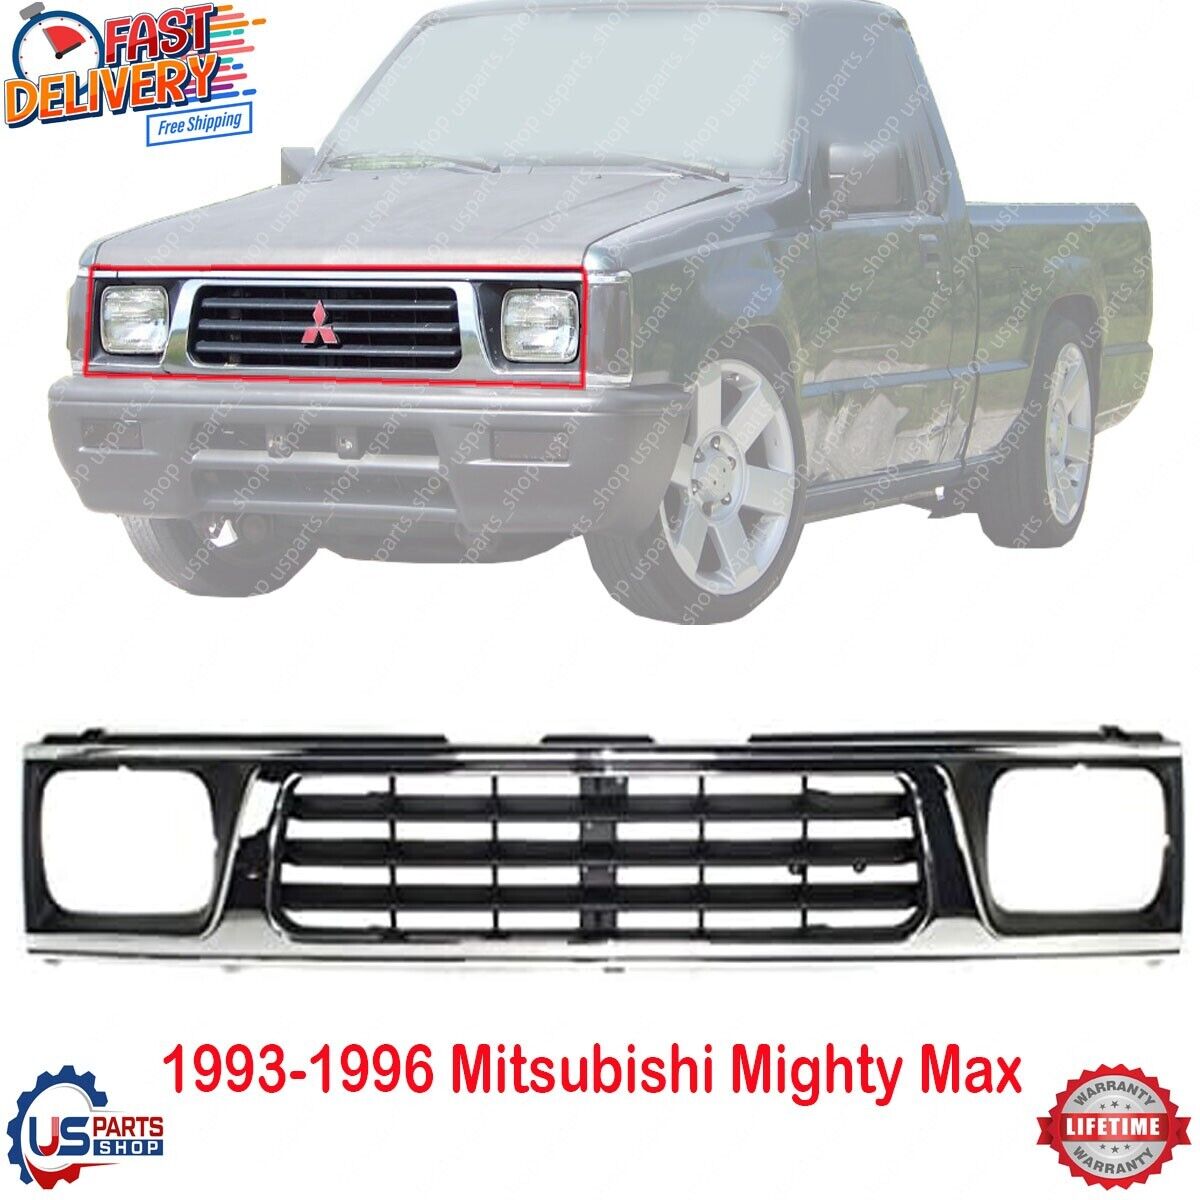 New Front Grille Assembly Chrome For 1993-1996 Mitsubishi Mighty Max Pickup